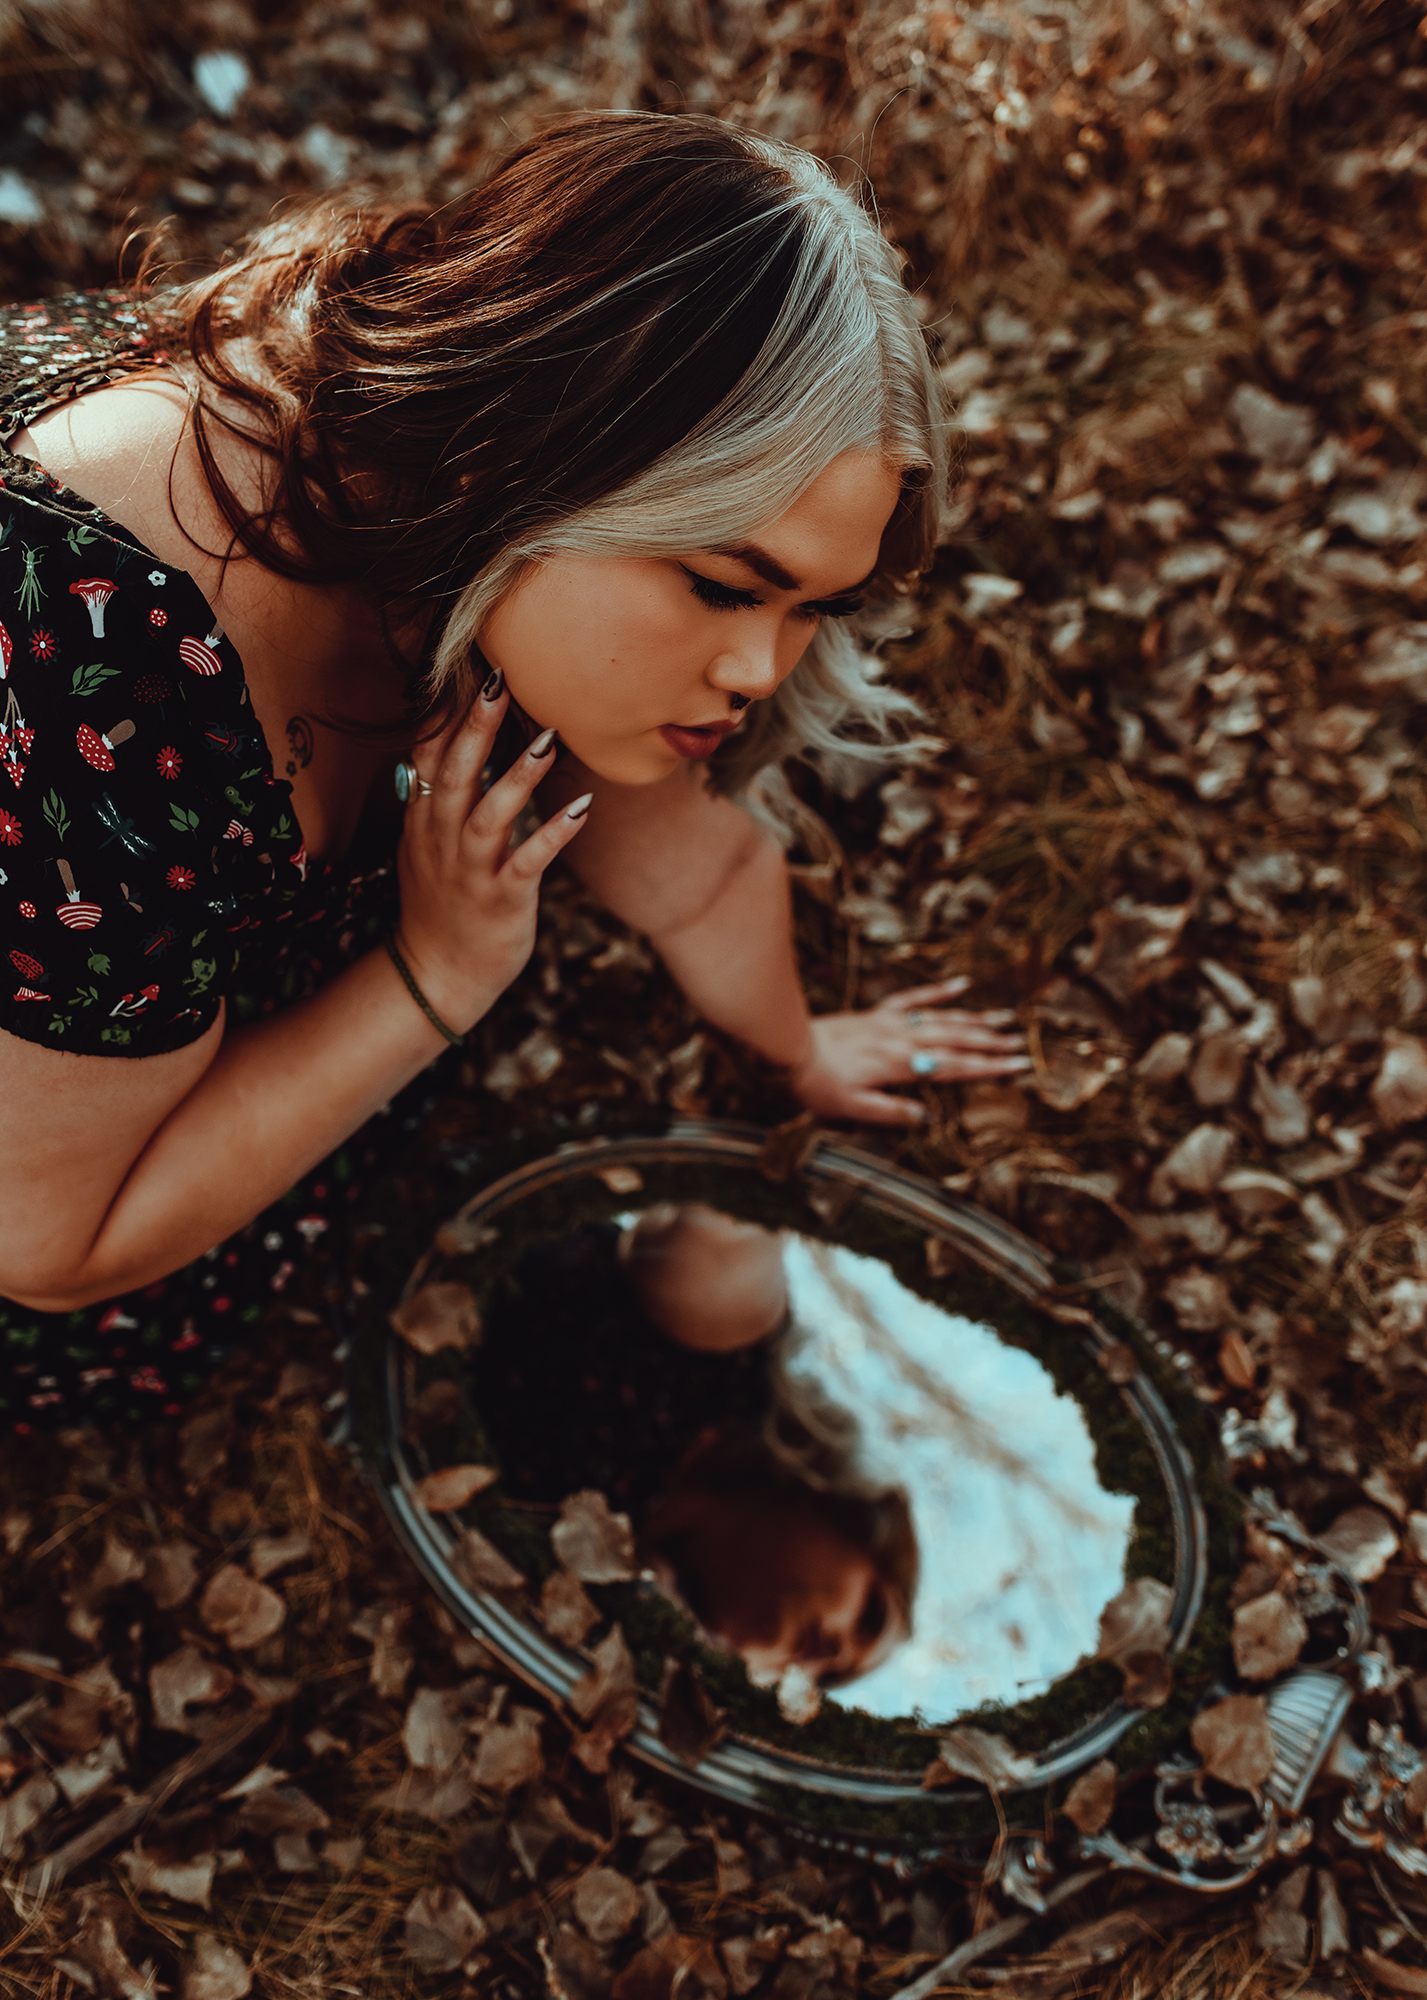 A person in a black floral dress kneels on the ground in a forest, looking at their blurred reflection in a round silver mirror. The ground is covered in fallen leaves and twigs, and the background consists of trees and foliage